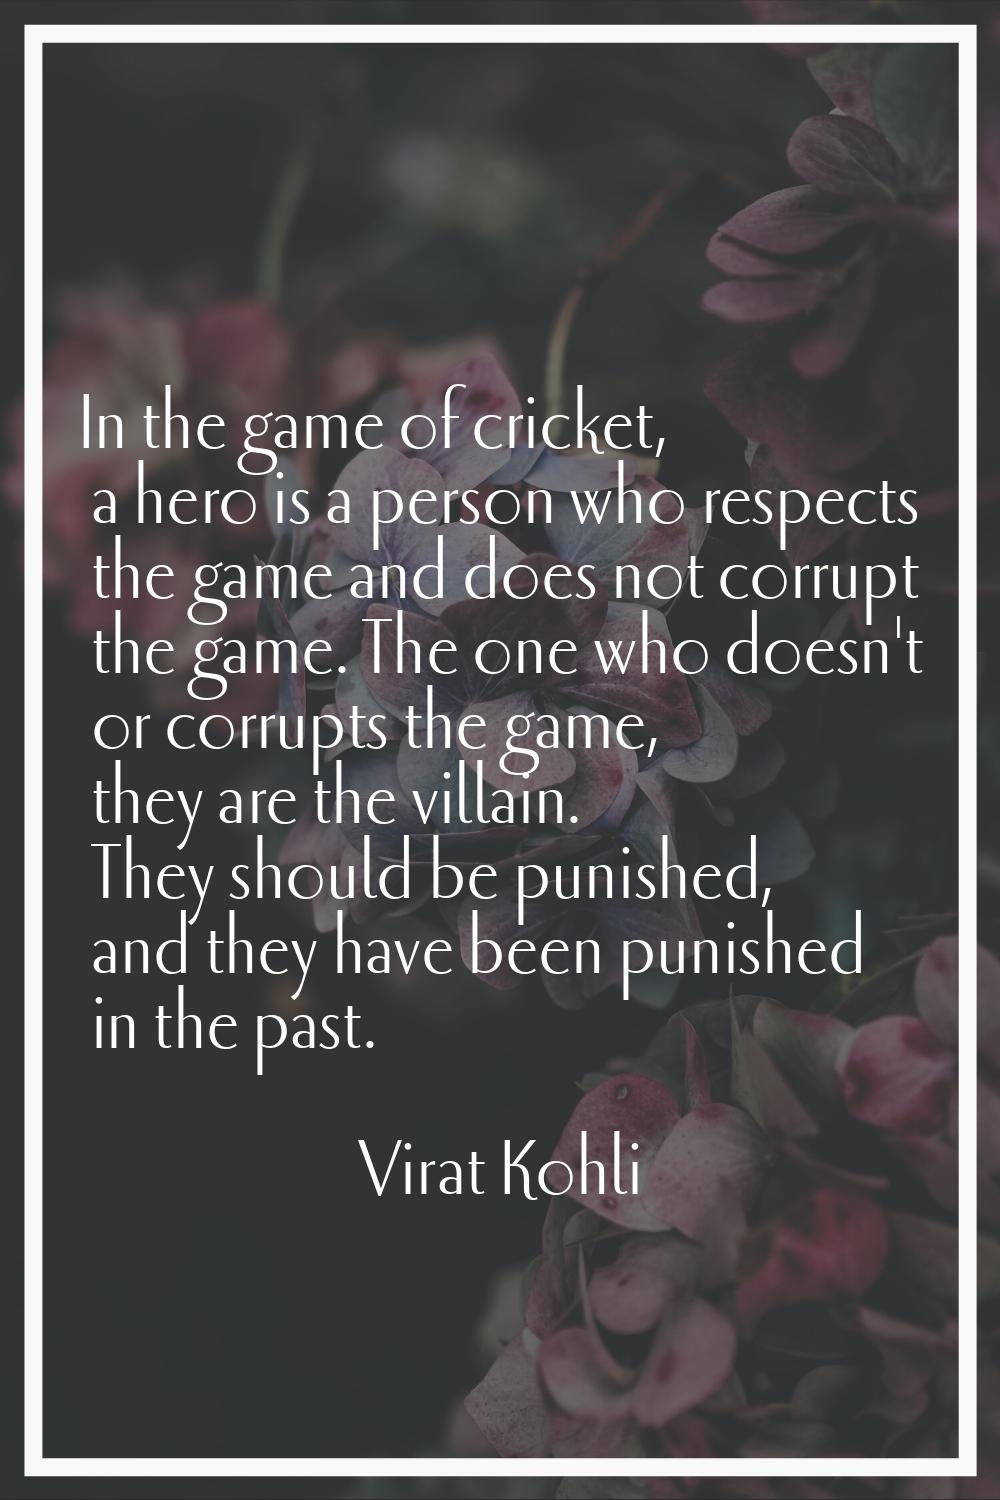 In the game of cricket, a hero is a person who respects the game and does not corrupt the game. The